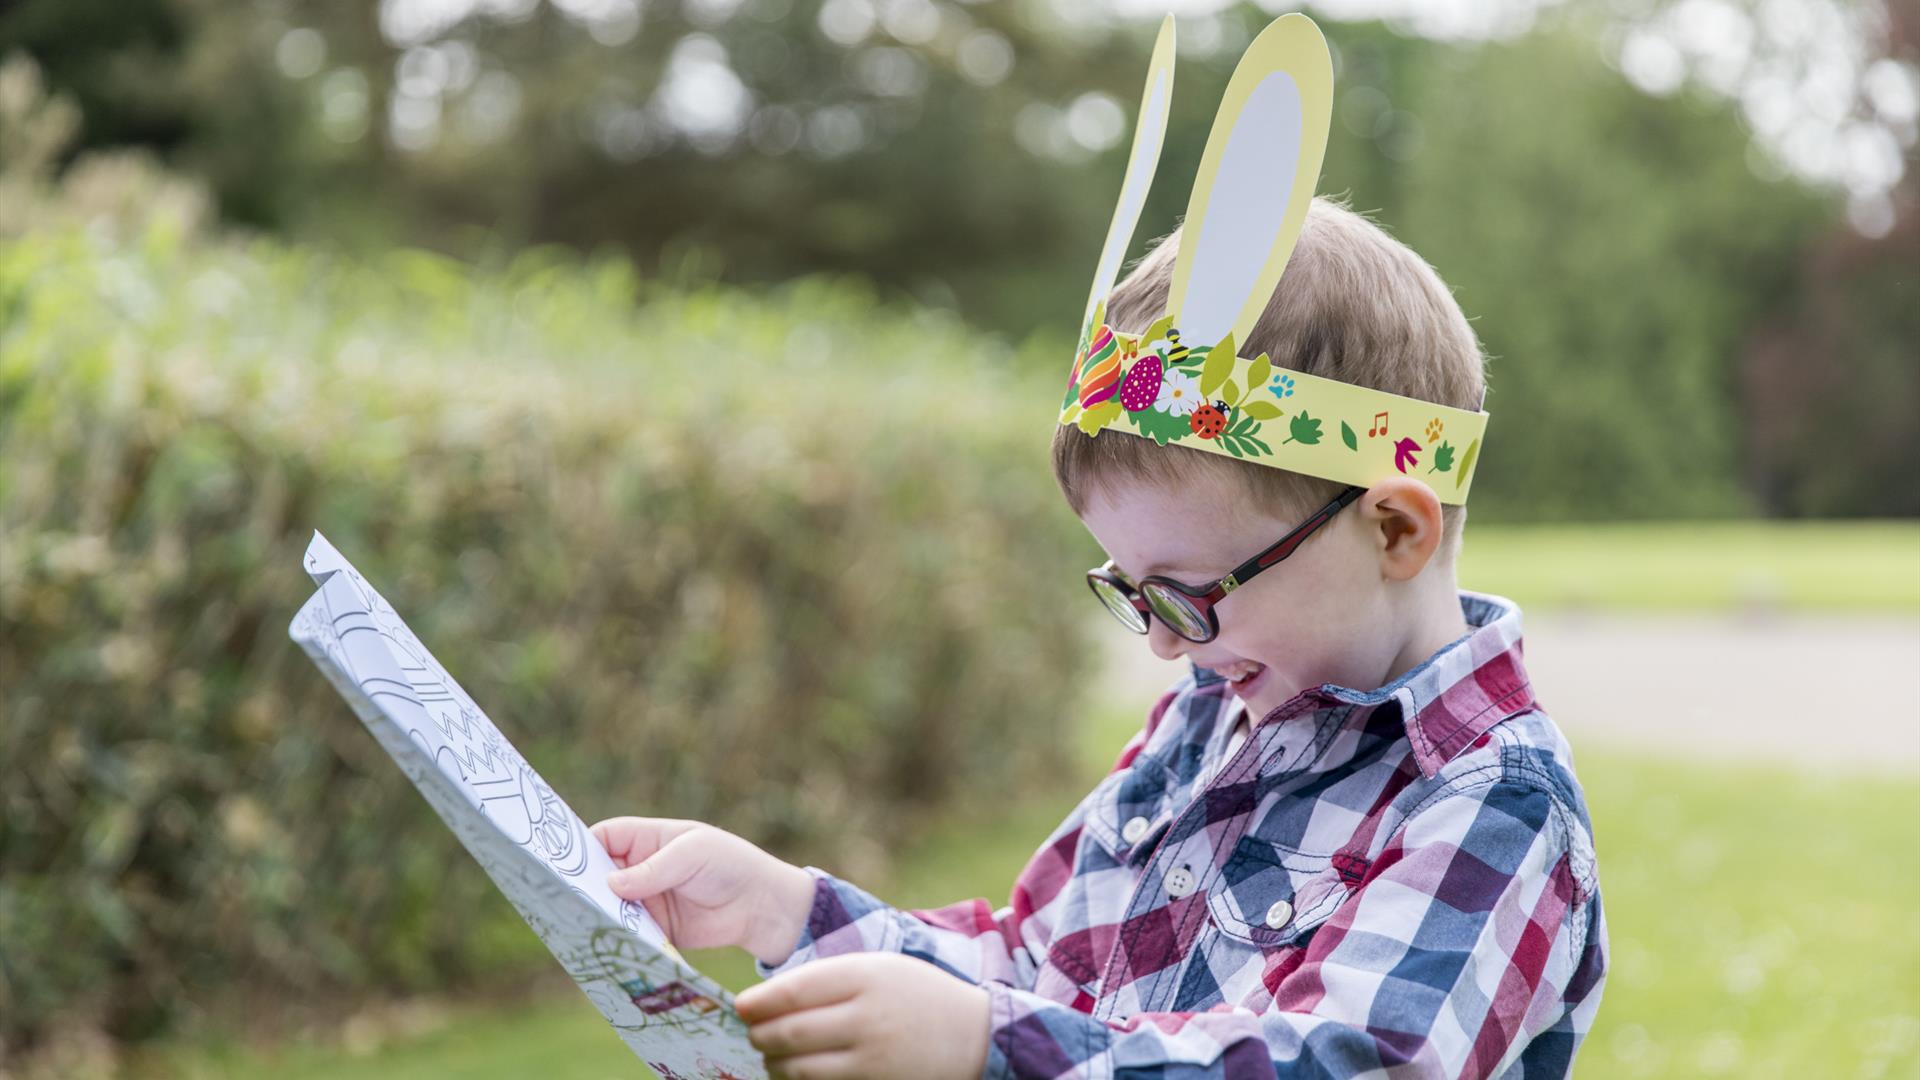 A young boy wearing bunny ears reading an Easter trail map